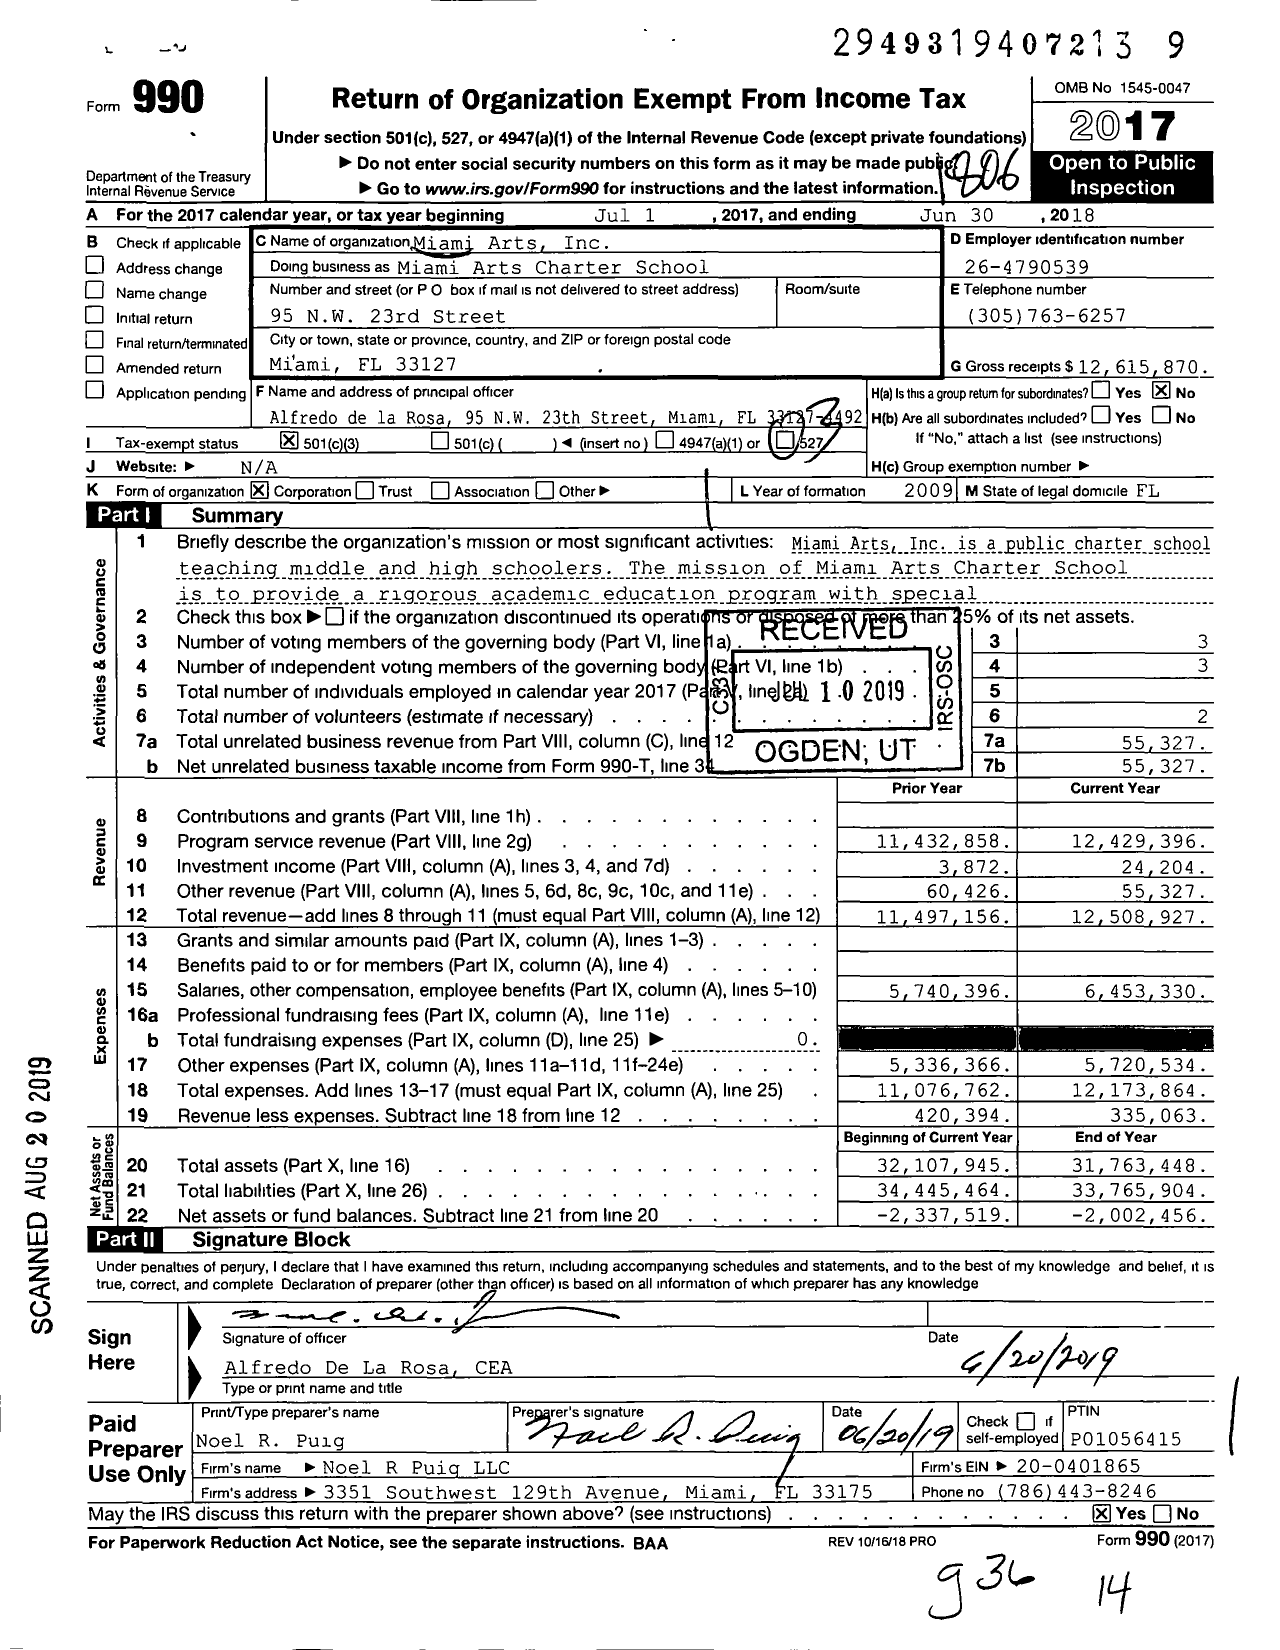 Image of first page of 2017 Form 990 for Miami Arts Charter School